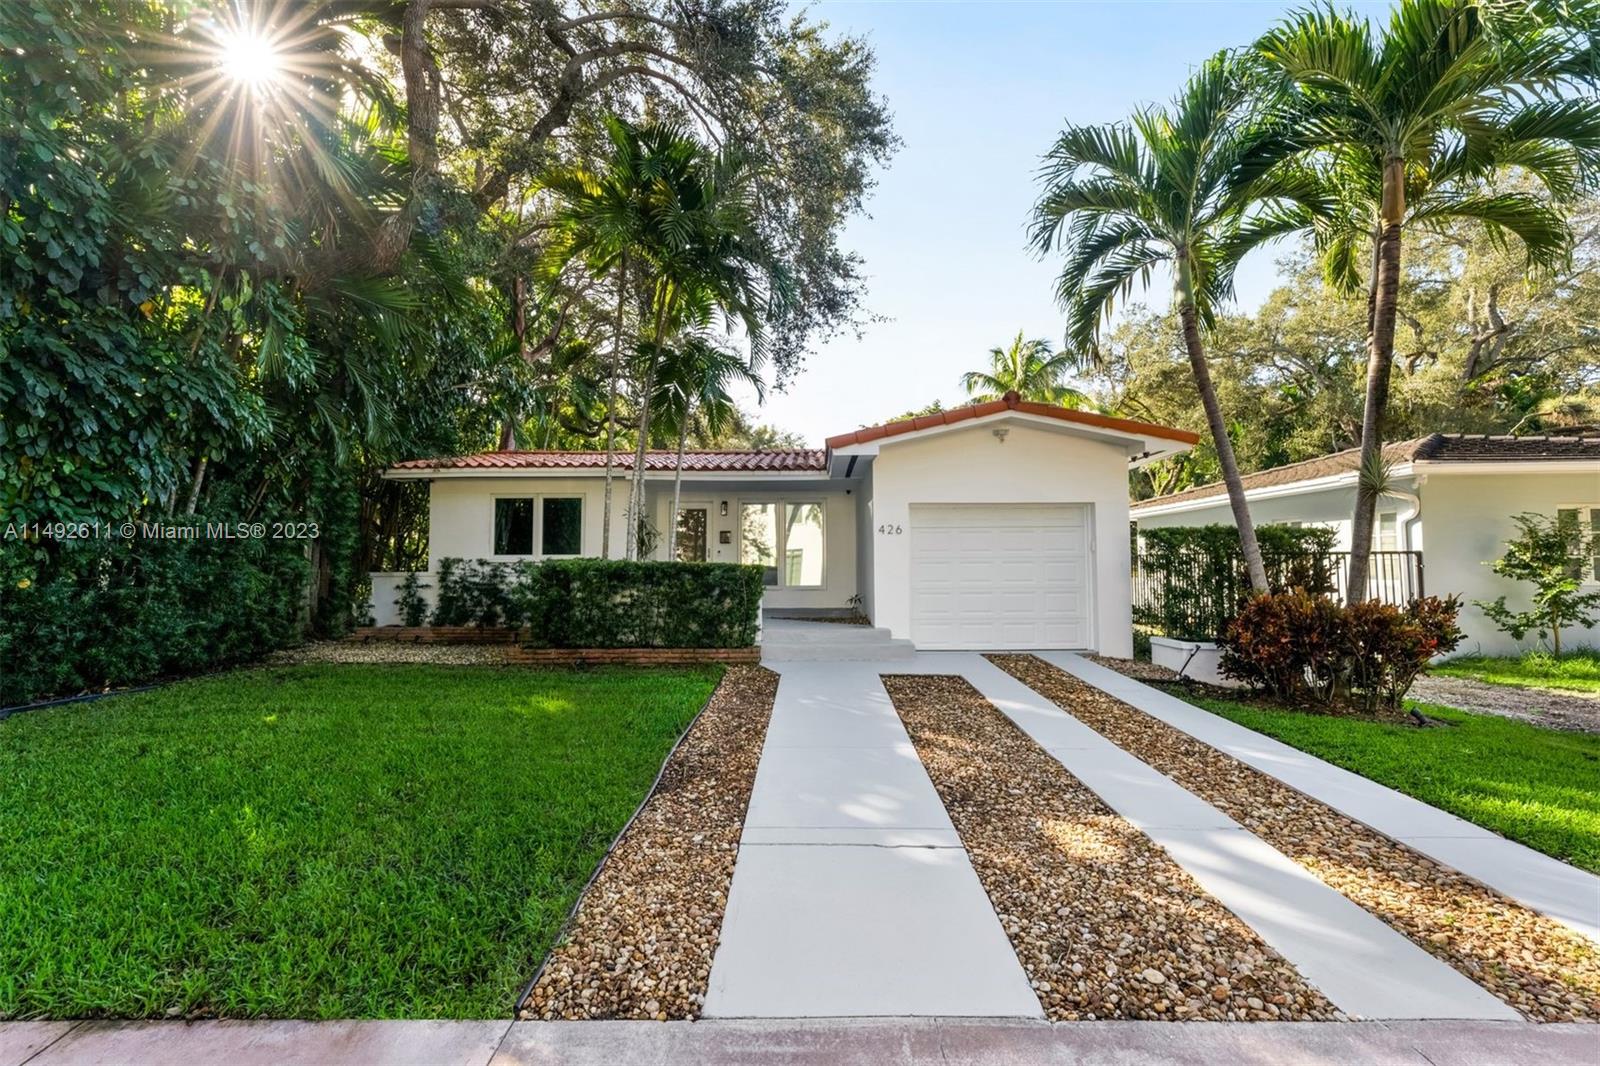 This beautifully renovated South Gables home boasts modern upgrades and classic charm. It features new porcelain flooring with a wood-like finish, an open kitchen with a large Statuario marble island, and a herringbone backsplash. The master suite includes a walk-in closet with a built-in makeup vanity. Outdoors, there is a deck with a pergola and string lighting. Upgrades include new appliances, a wine cooler, a downdraft vent, and LED accent lighting. The home is equipped with smart home technology, smart switches, IP cameras, impact windows, and doors for security and efficiency. A small park is located just four lots over, and it's minutes from Merrick Park, offering a prime, central Coral Gables location.